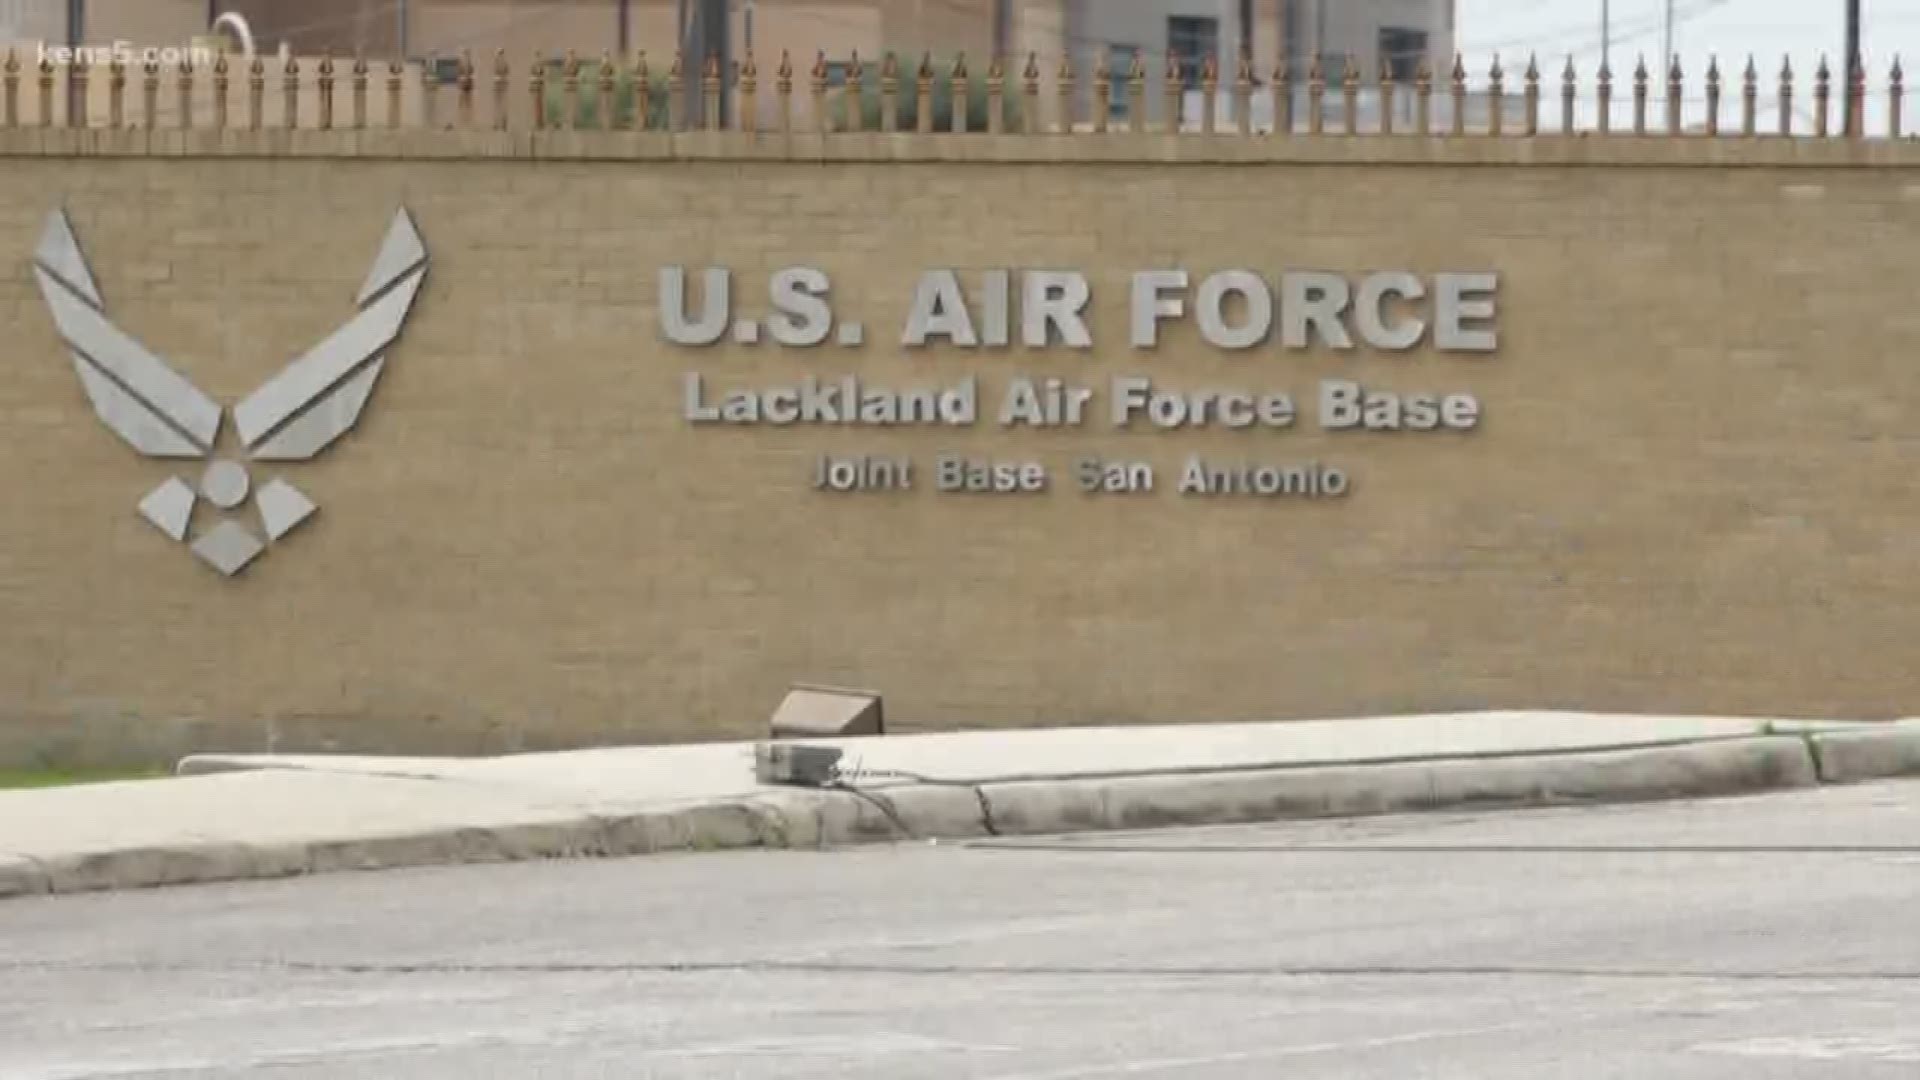 A townhall meeting at Joint Base San Antonio is just getting underway to address Lackland's designation as a quarantine site for overseas travelers arriving overseas